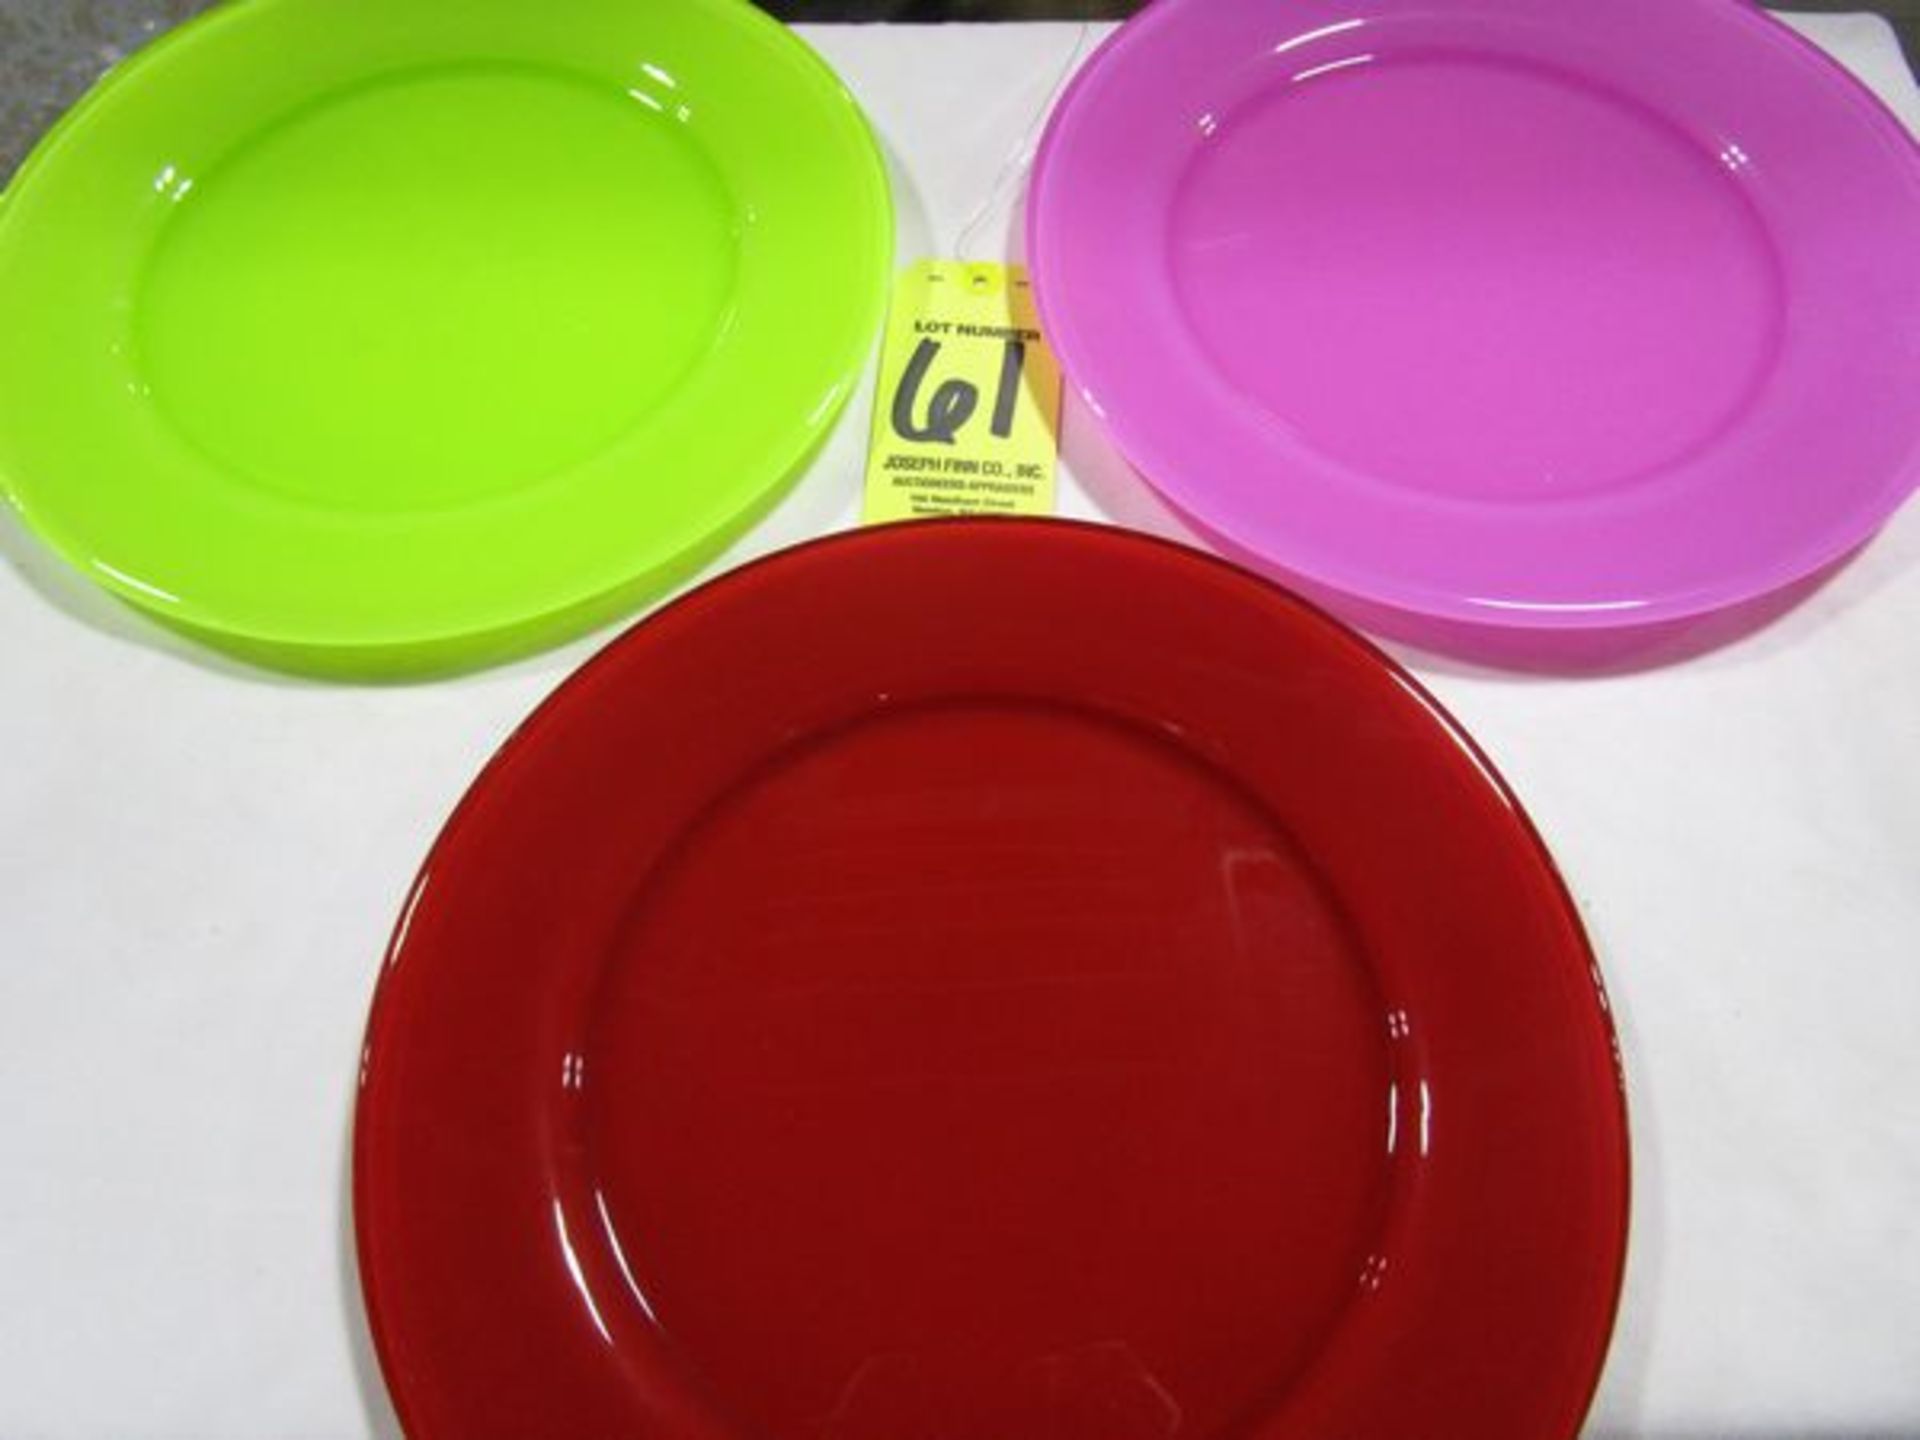 LOT (95) 12" Hot Pink Charger Plates, (74) 12" Dark Red Charger Plates, (66) 12" Lime Green